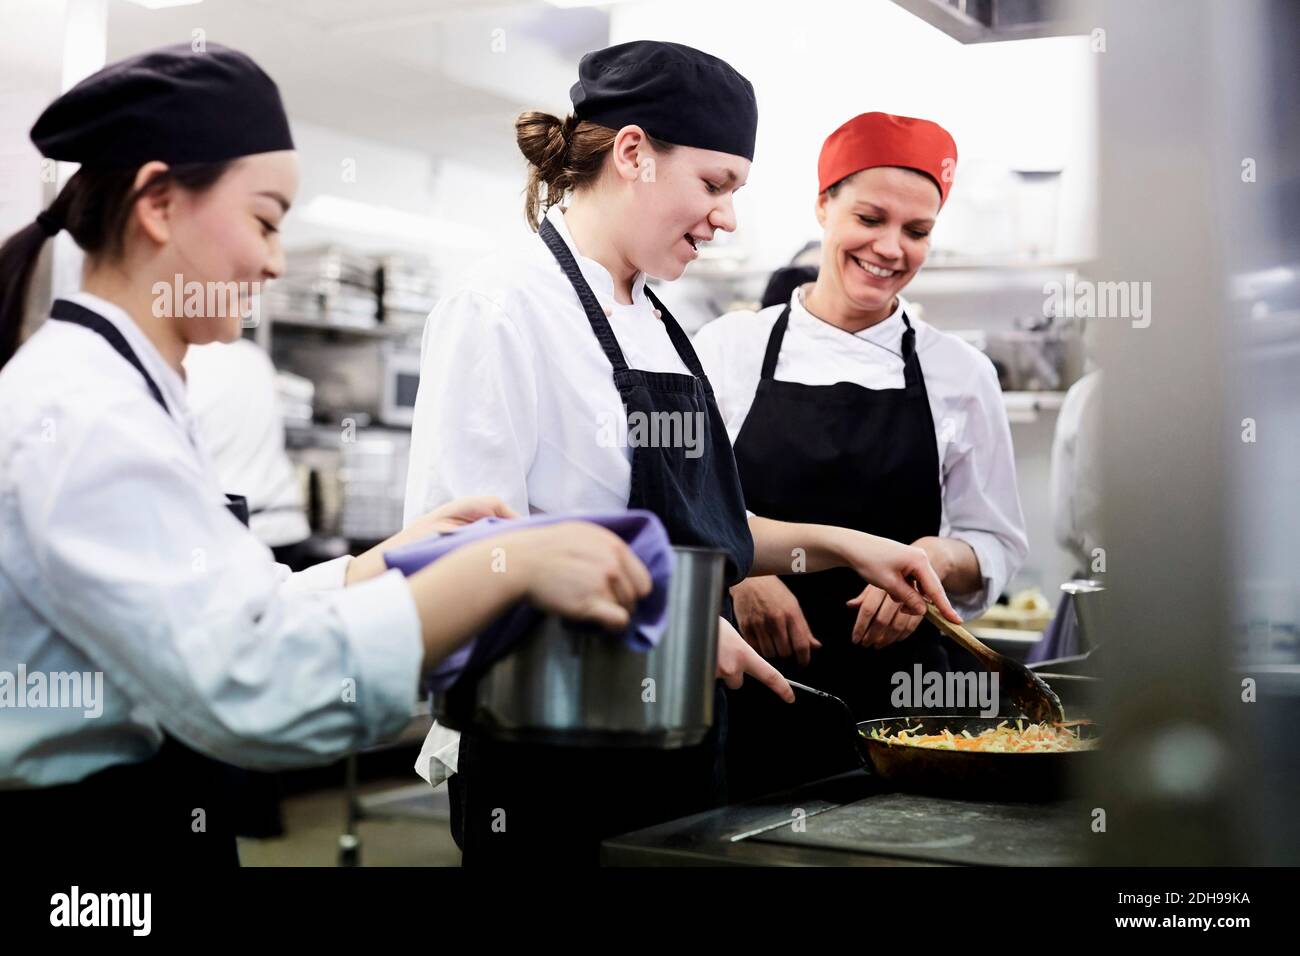 Teacher watching female chef students cooking food in commercial kitchen Stock Photo